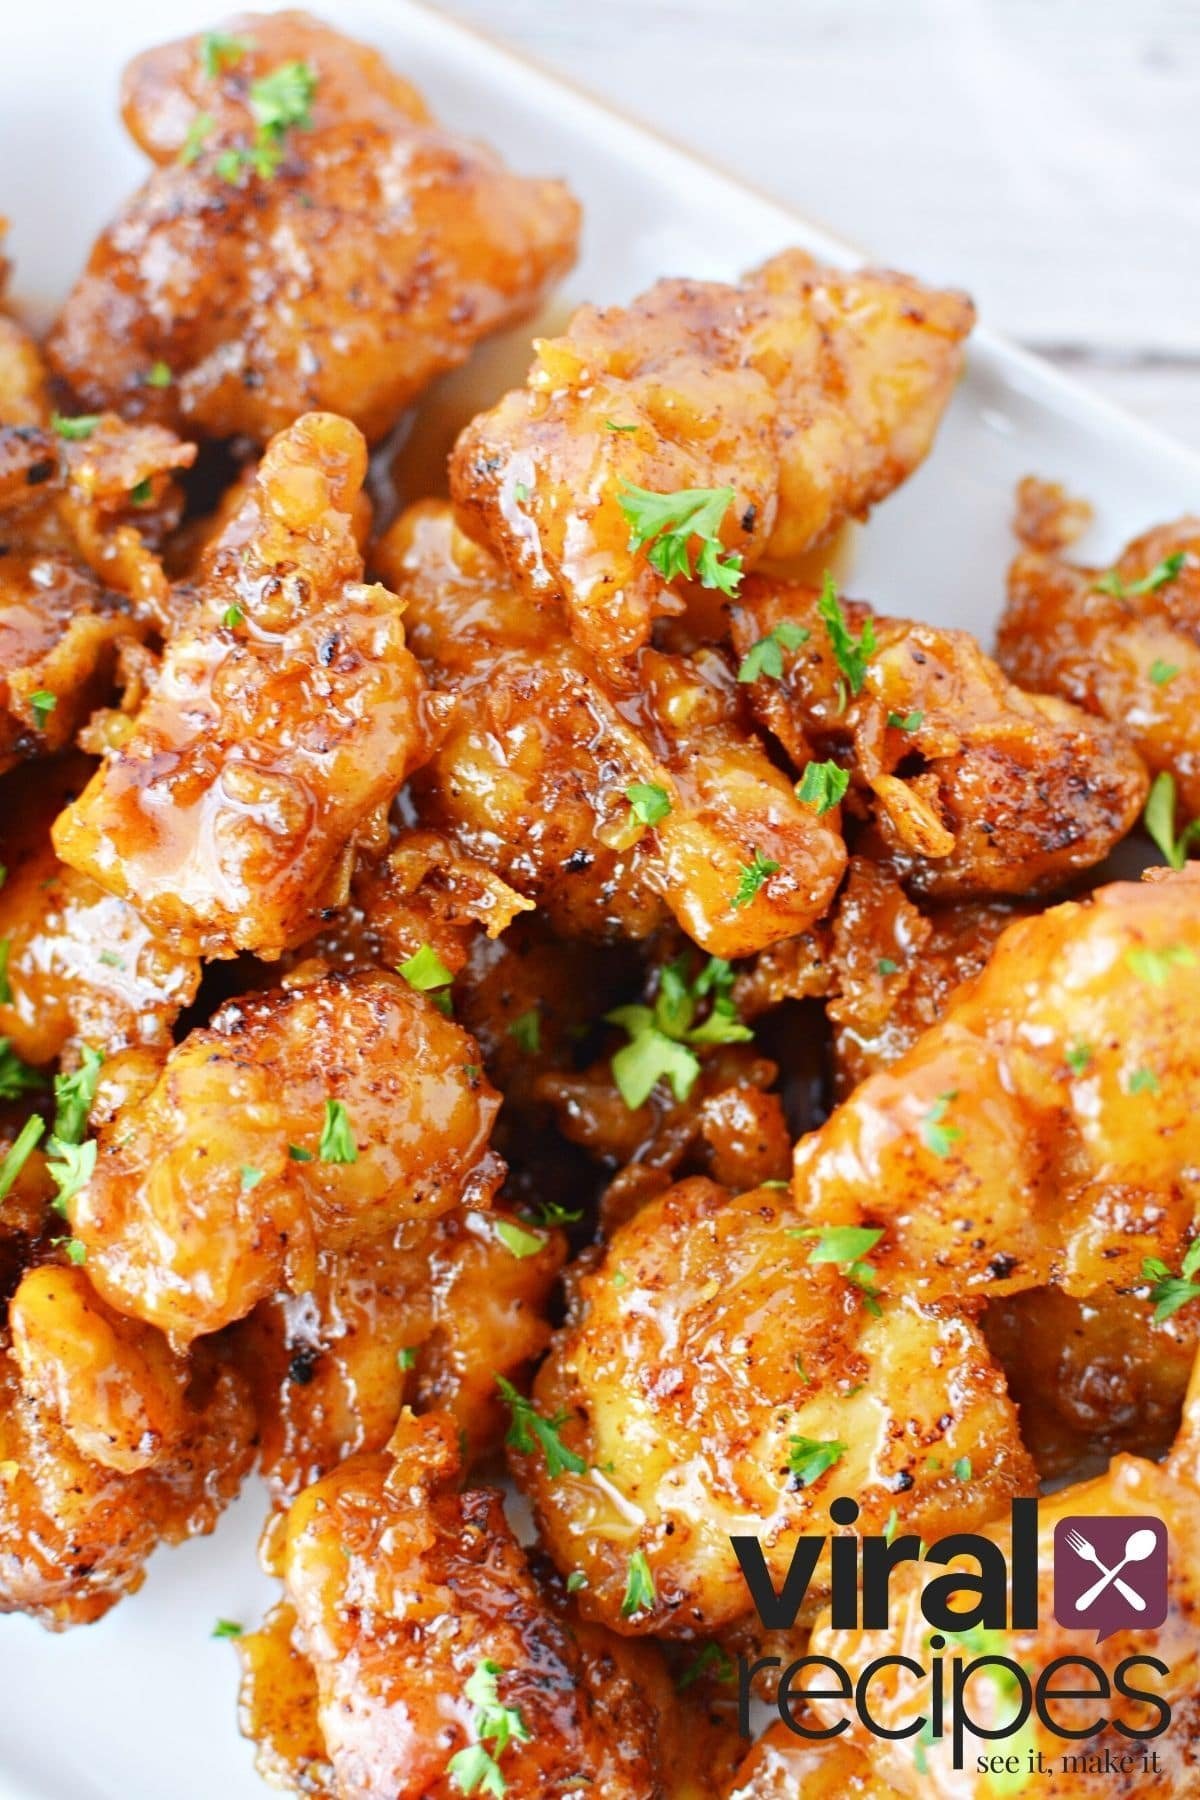 These Viral Chicken Recipes Are Totally Worth The Hypes